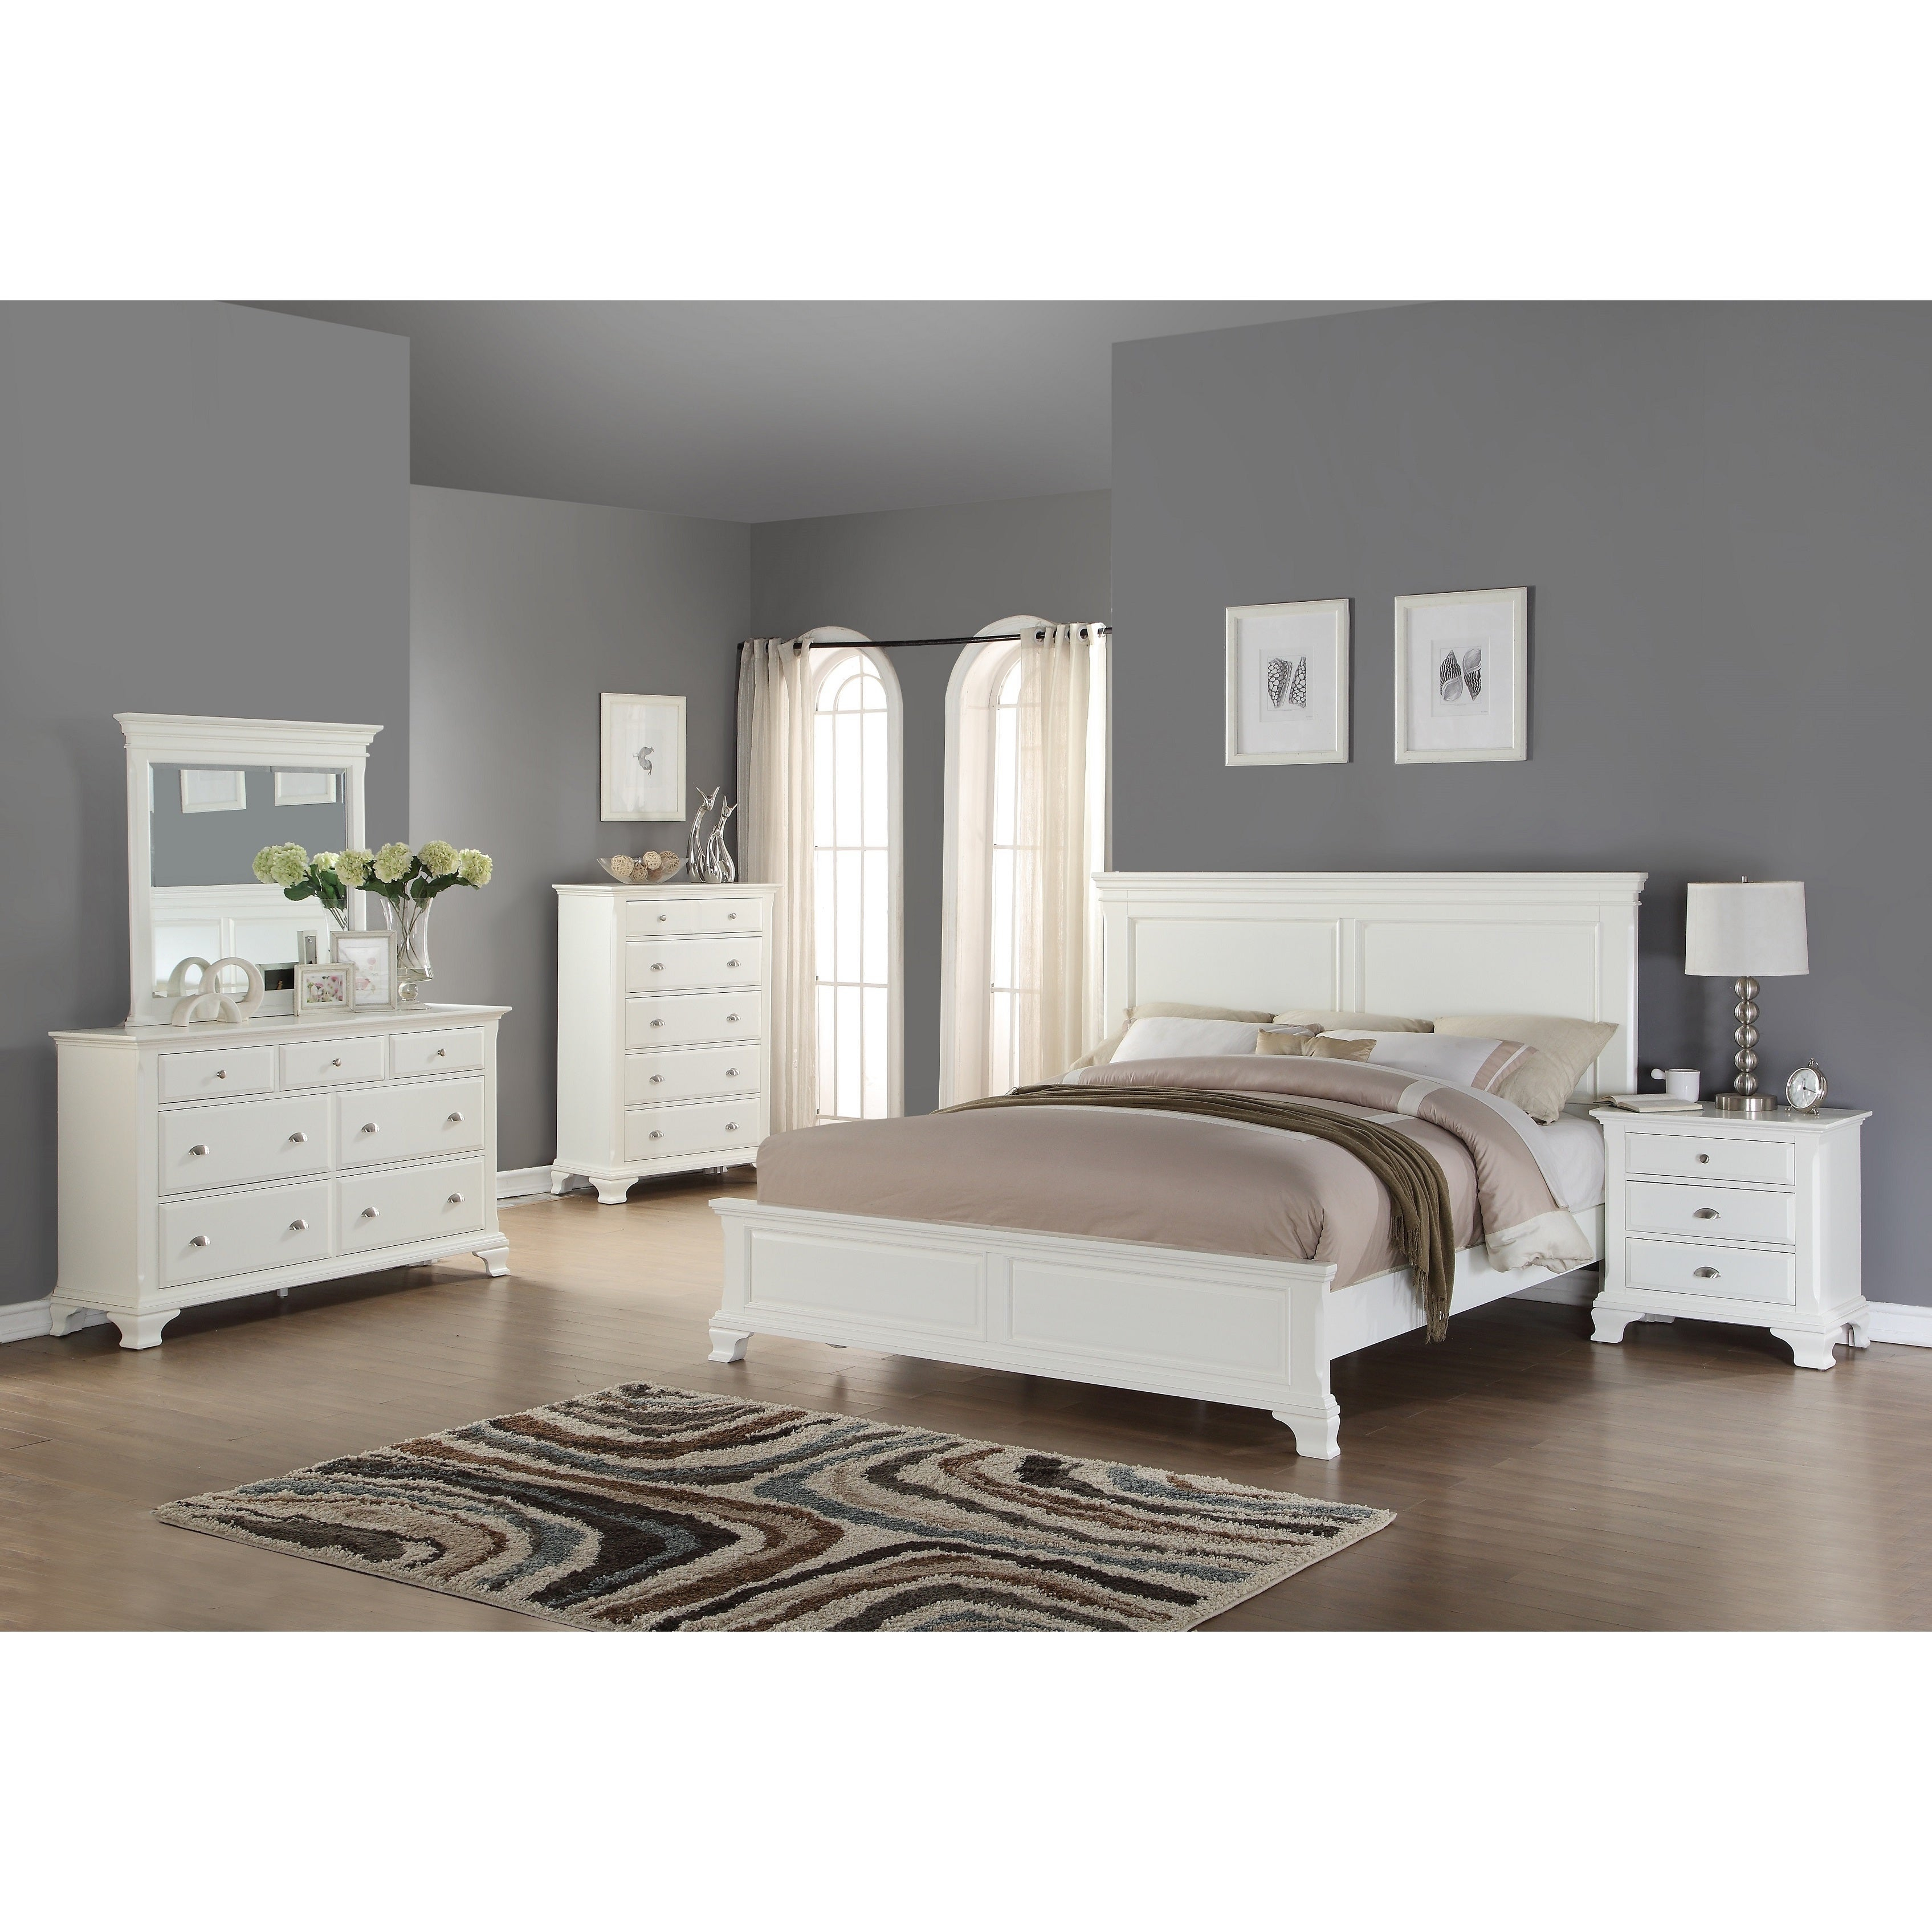 Laveno 012 White Wood Bedroom Furniture Set Includes Queen Bed Dresser Mirror Night Stand And Chest within measurements 3390 X 3390